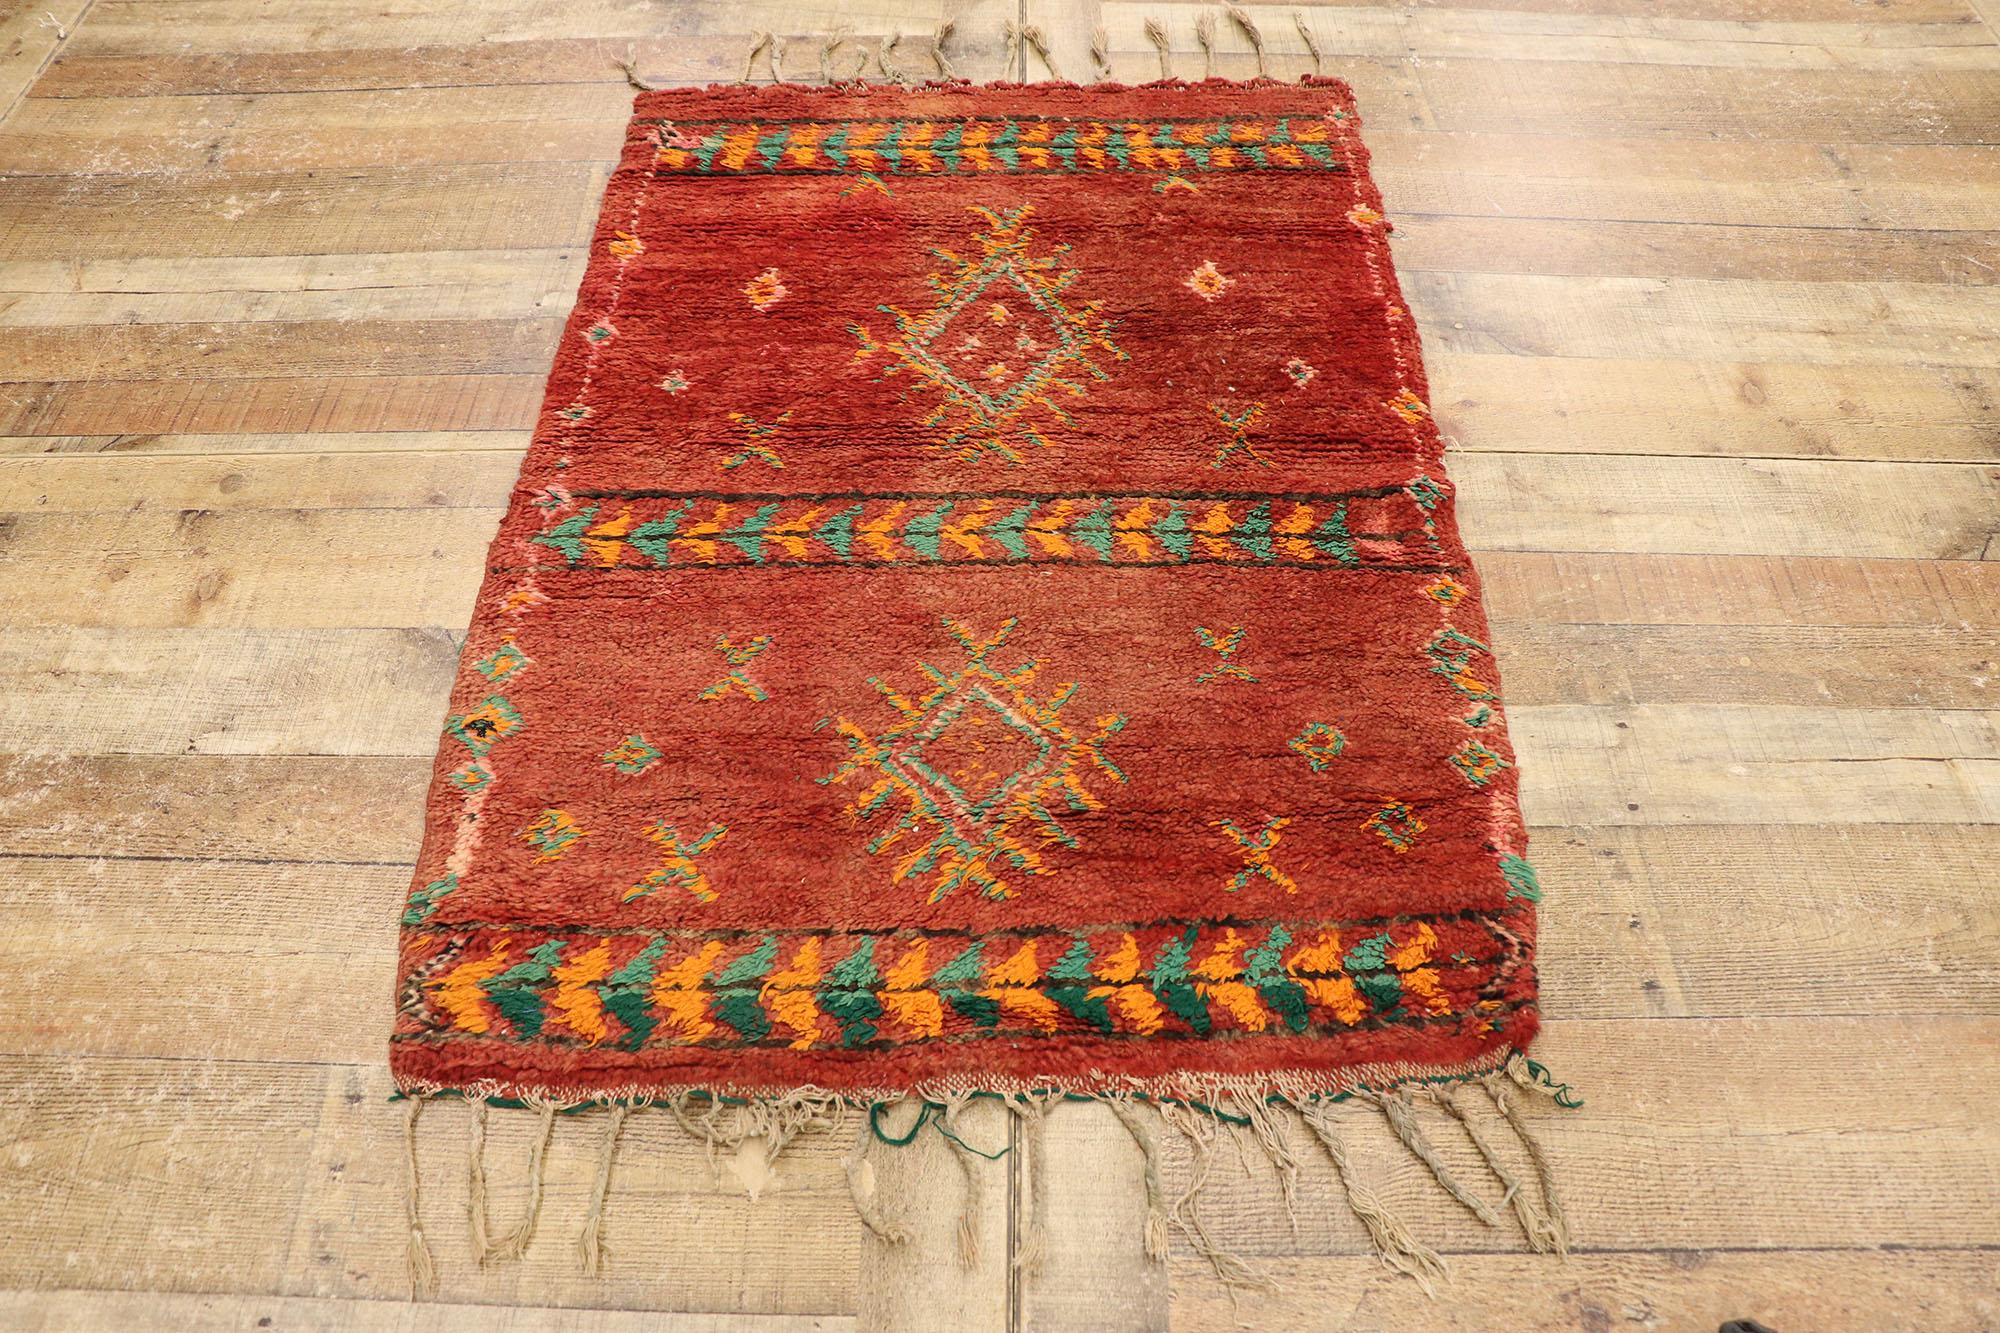 Wool Vintage Red Boujad Moroccan Rug, Tribal Enchantment Meets Southwest Boho Chic For Sale